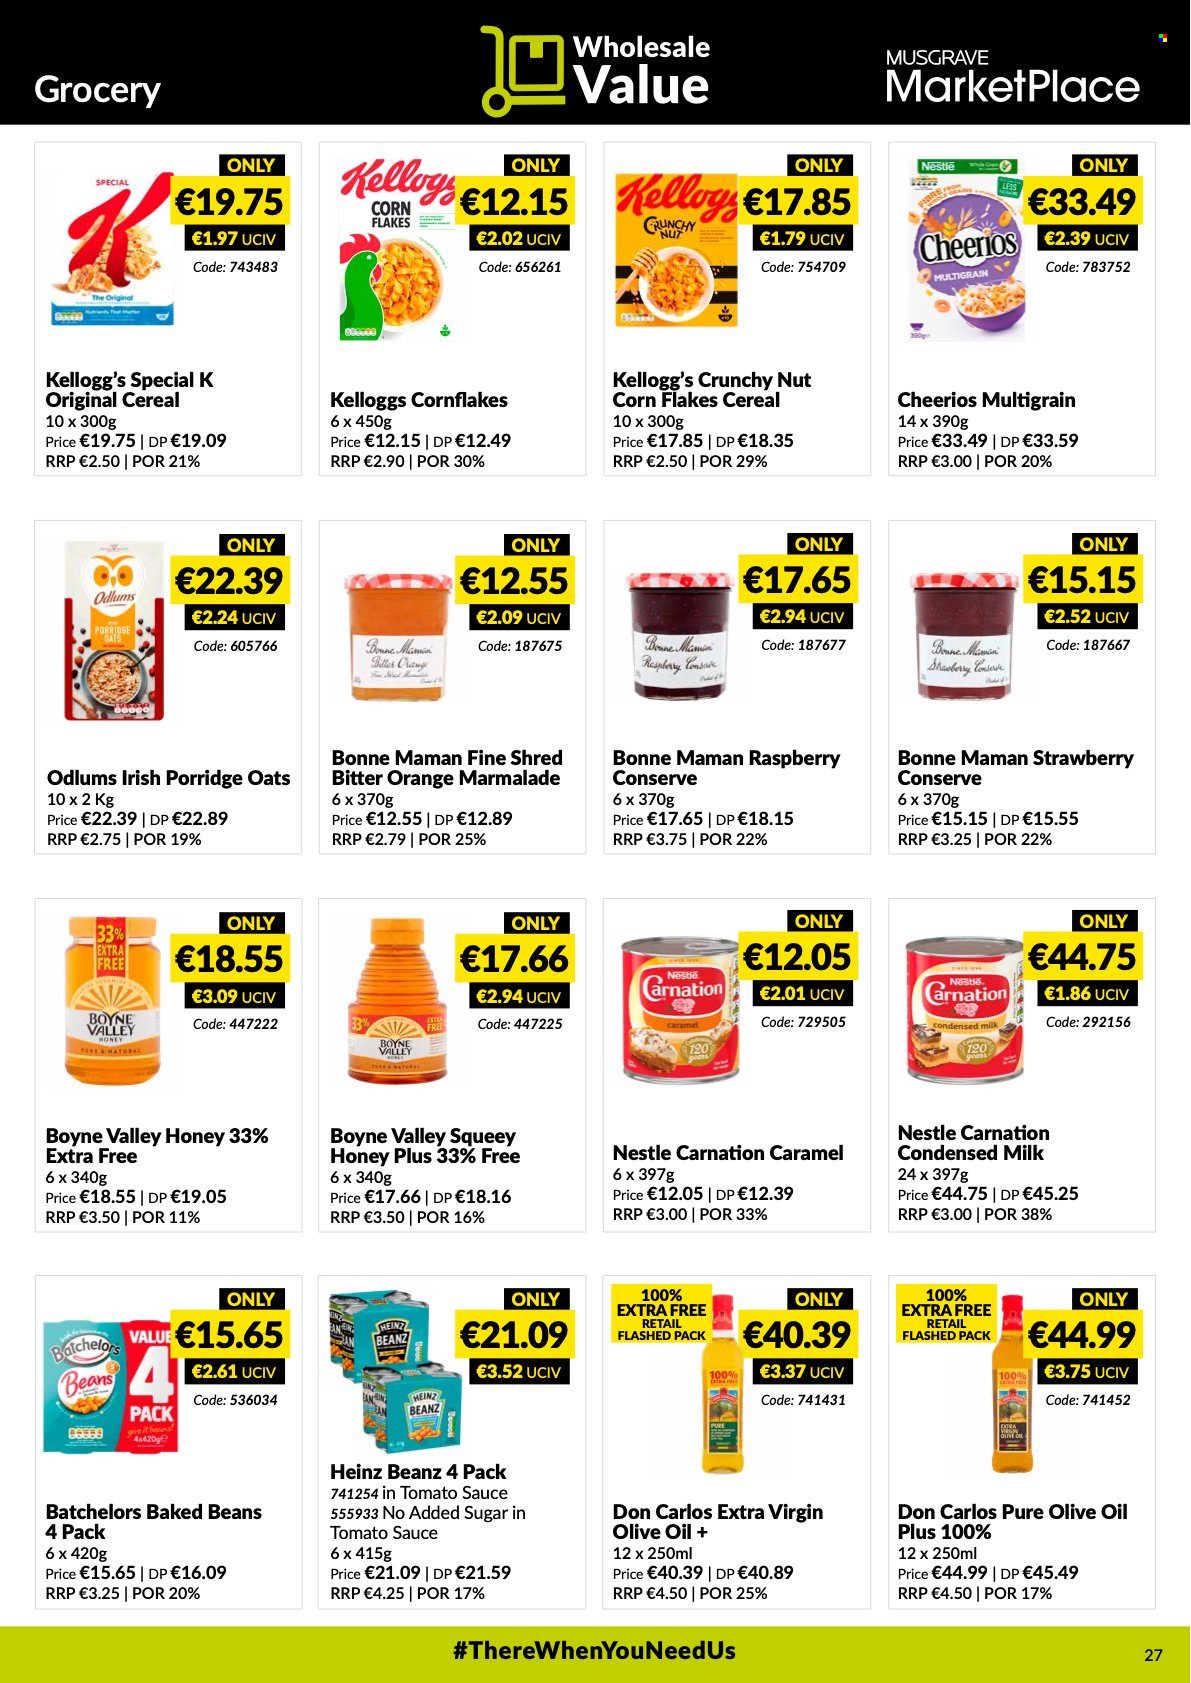 thumbnail - MUSGRAVE Market Place offer  - 16.01.2022 - 12.02.2022 - Sales products - beans, oranges, milk, condensed milk, Nestlé, Kellogg's, oats, Heinz, baked beans, cereals, Cheerios, corn flakes, porridge, caramel, extra virgin olive oil, olive oil, oil, honey. Page 27.